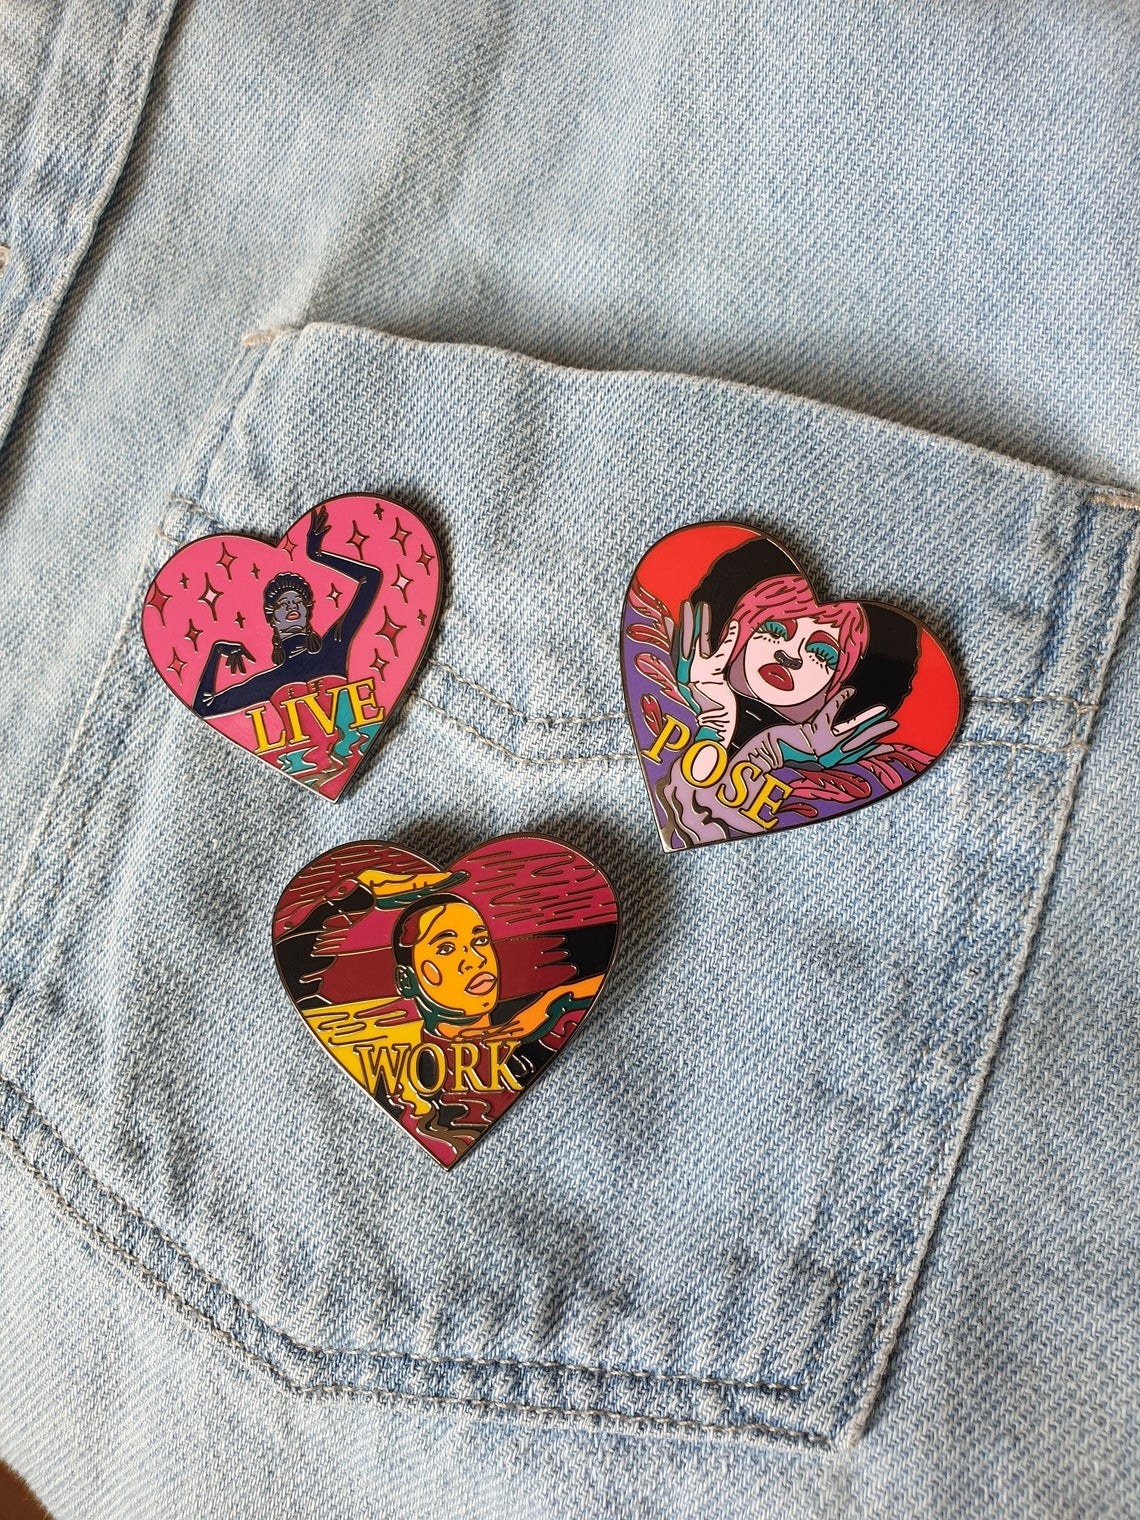 three heart-shaped pins with colorful illustrations of Elektra, Angel, and Damon respectively and they&#x27;re all doing Vogue poses